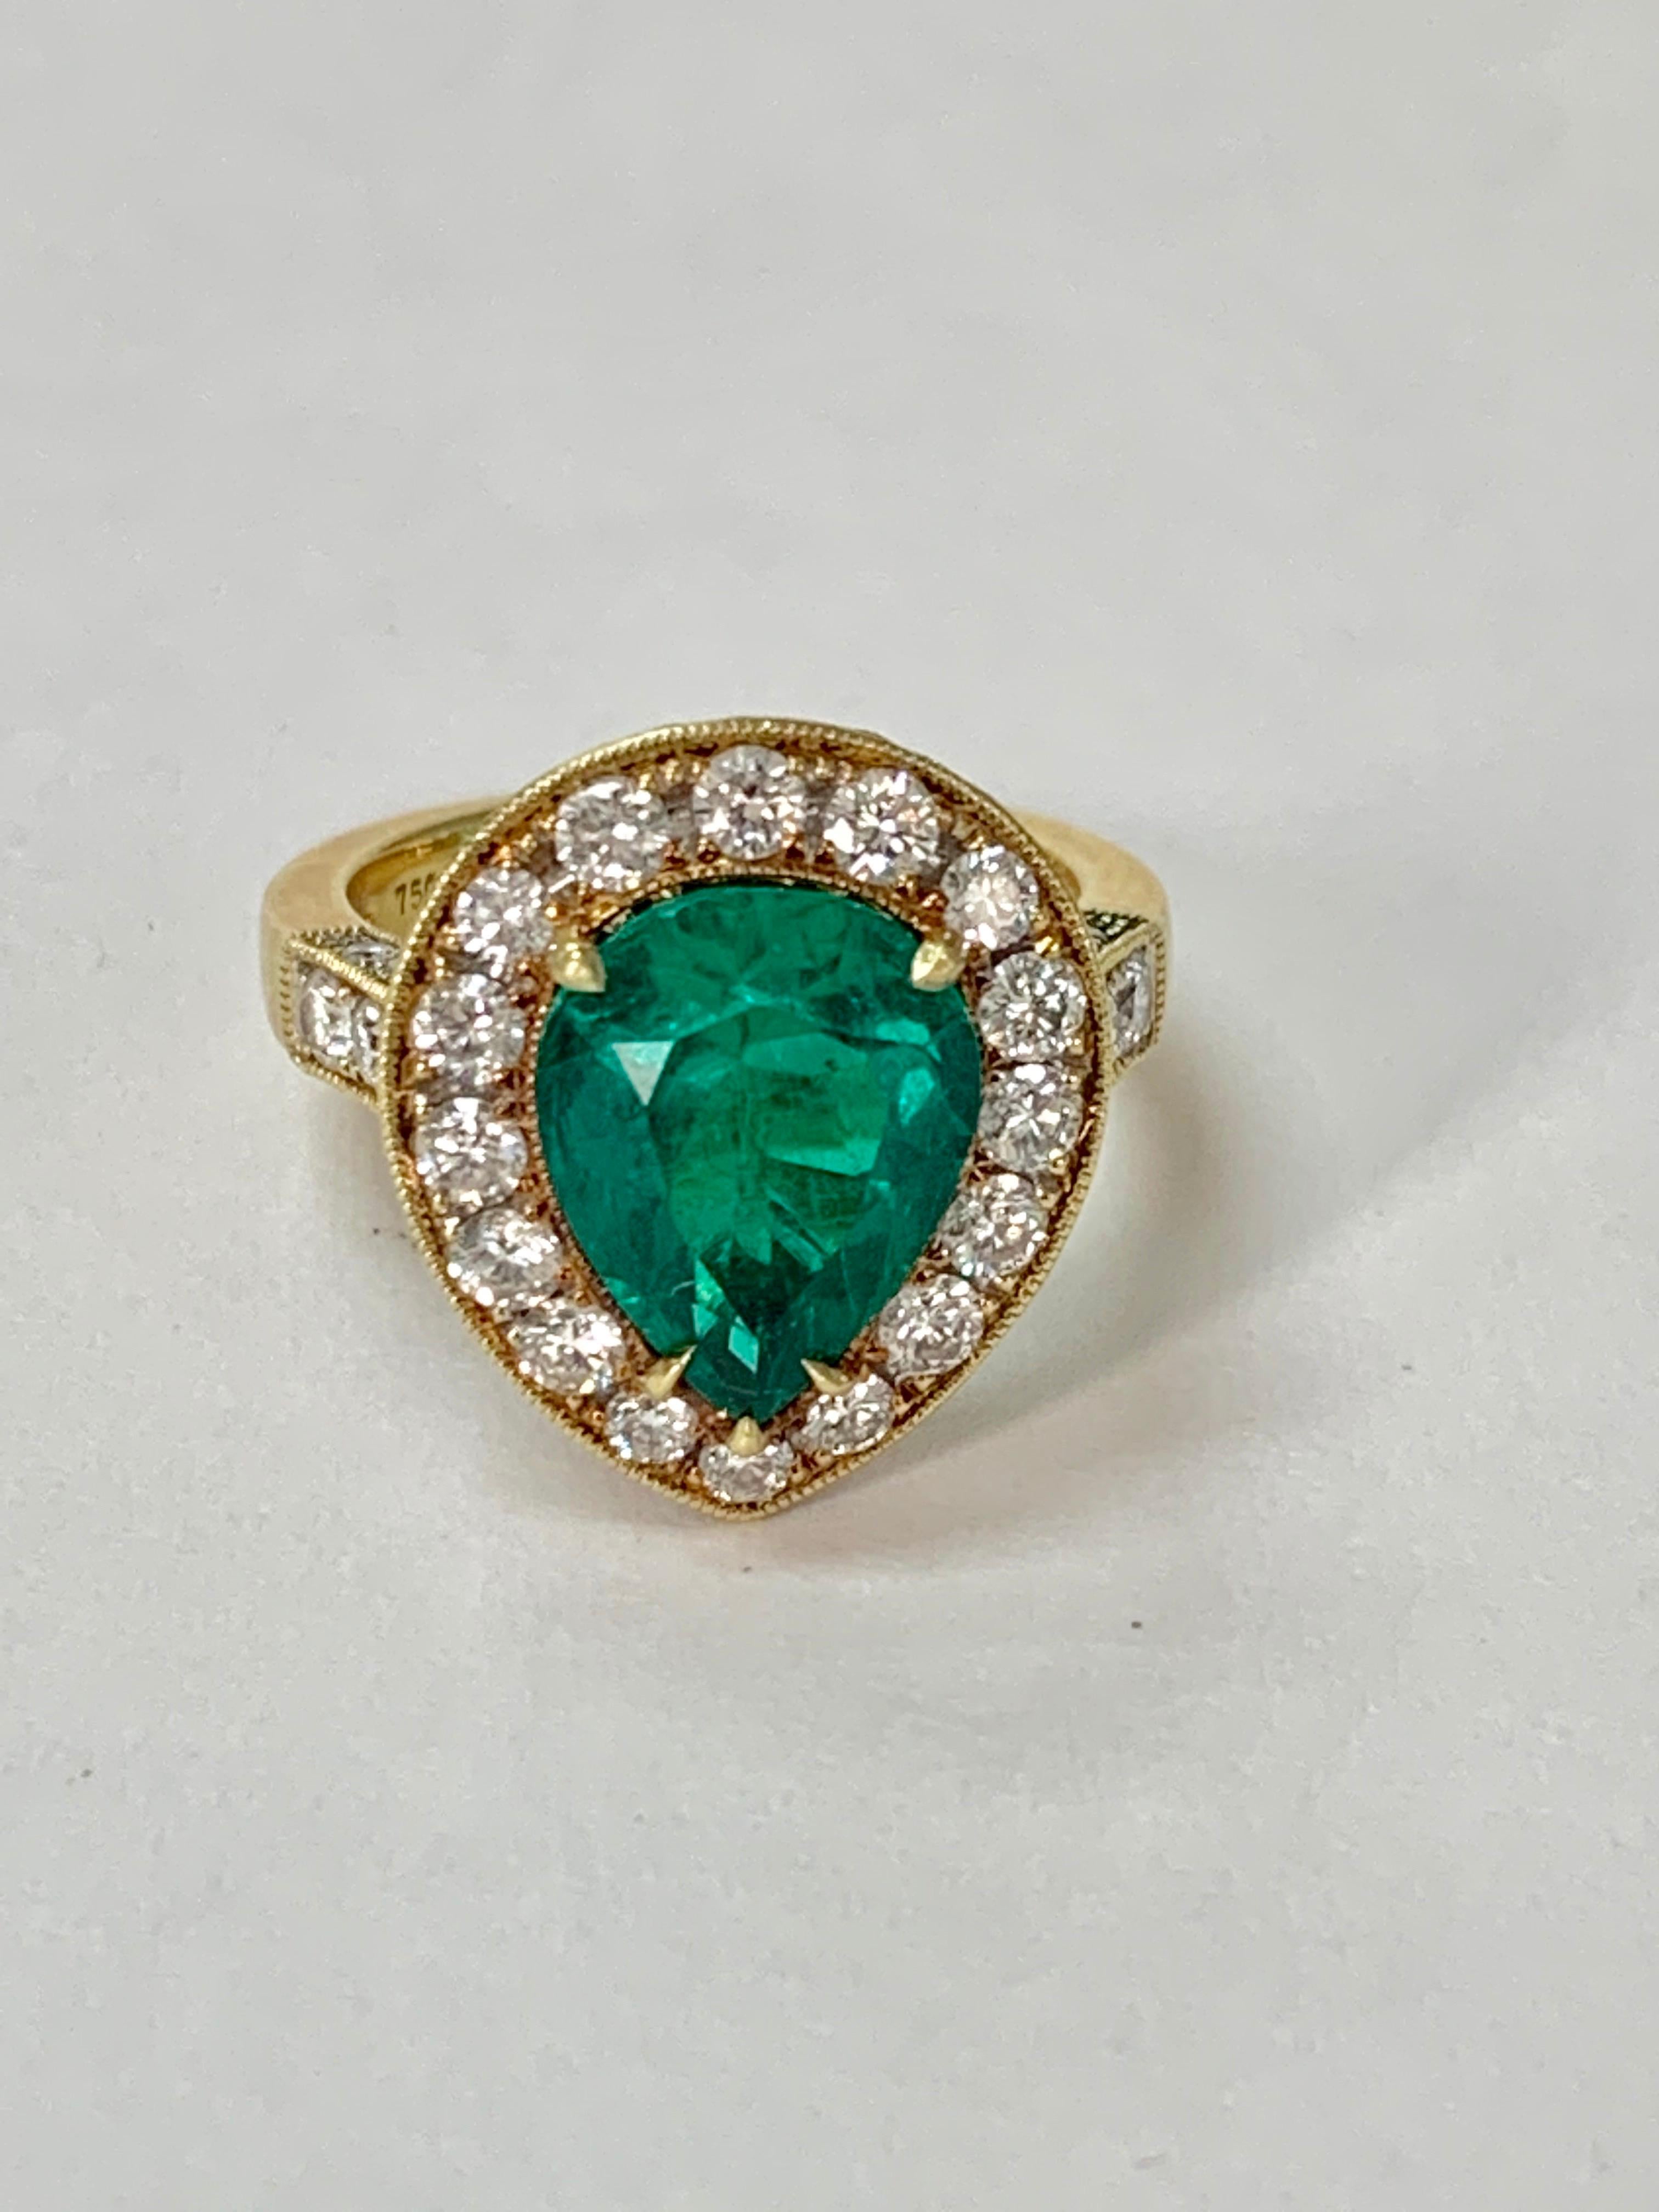 3.25 Carat Emerald and Diamond Engagement Ring in 18K Yellow Gold 5